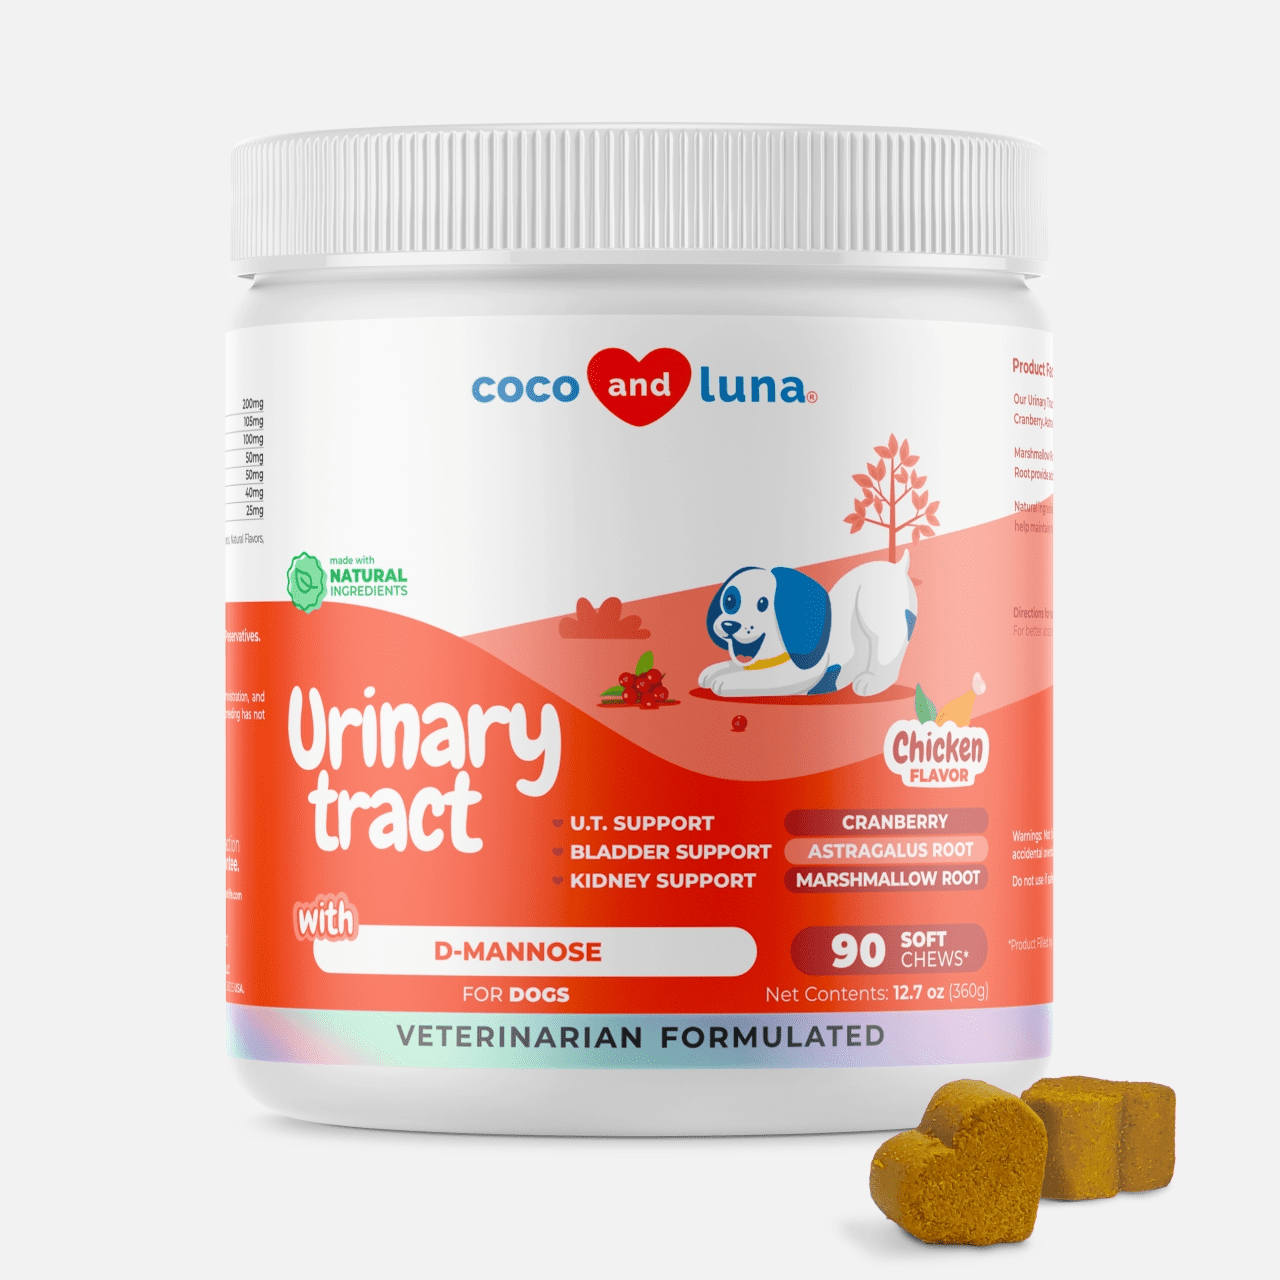 Urinary Tract for Dogs  - 90 Soft Chews - Coco and Luna